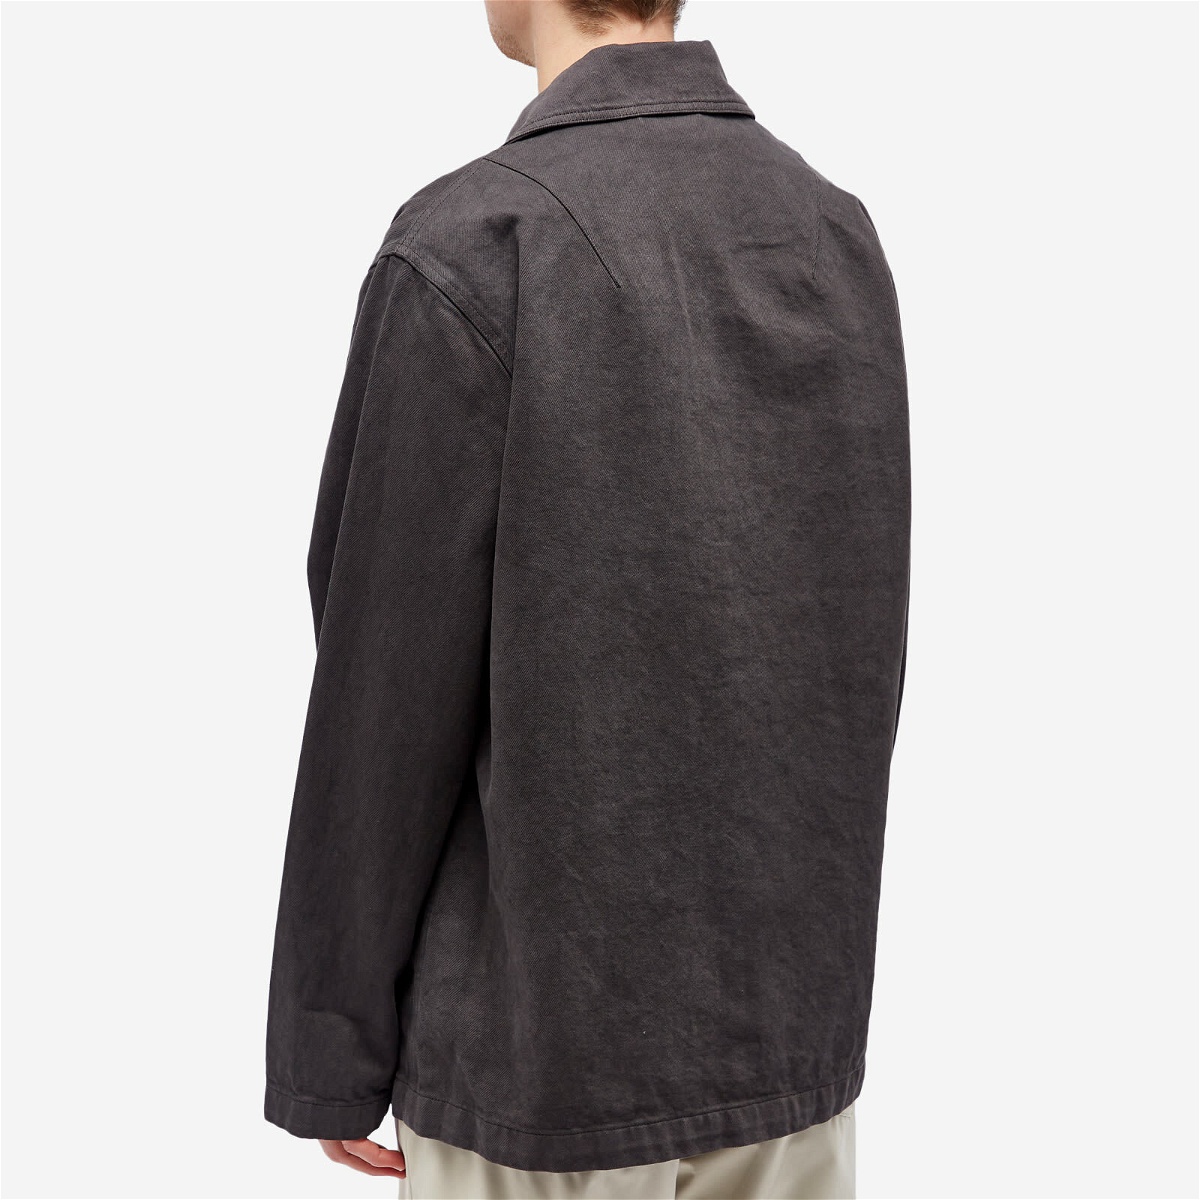 Objects IV Life Men's Chore Jacket in Anthracite Grey Objects IV Life